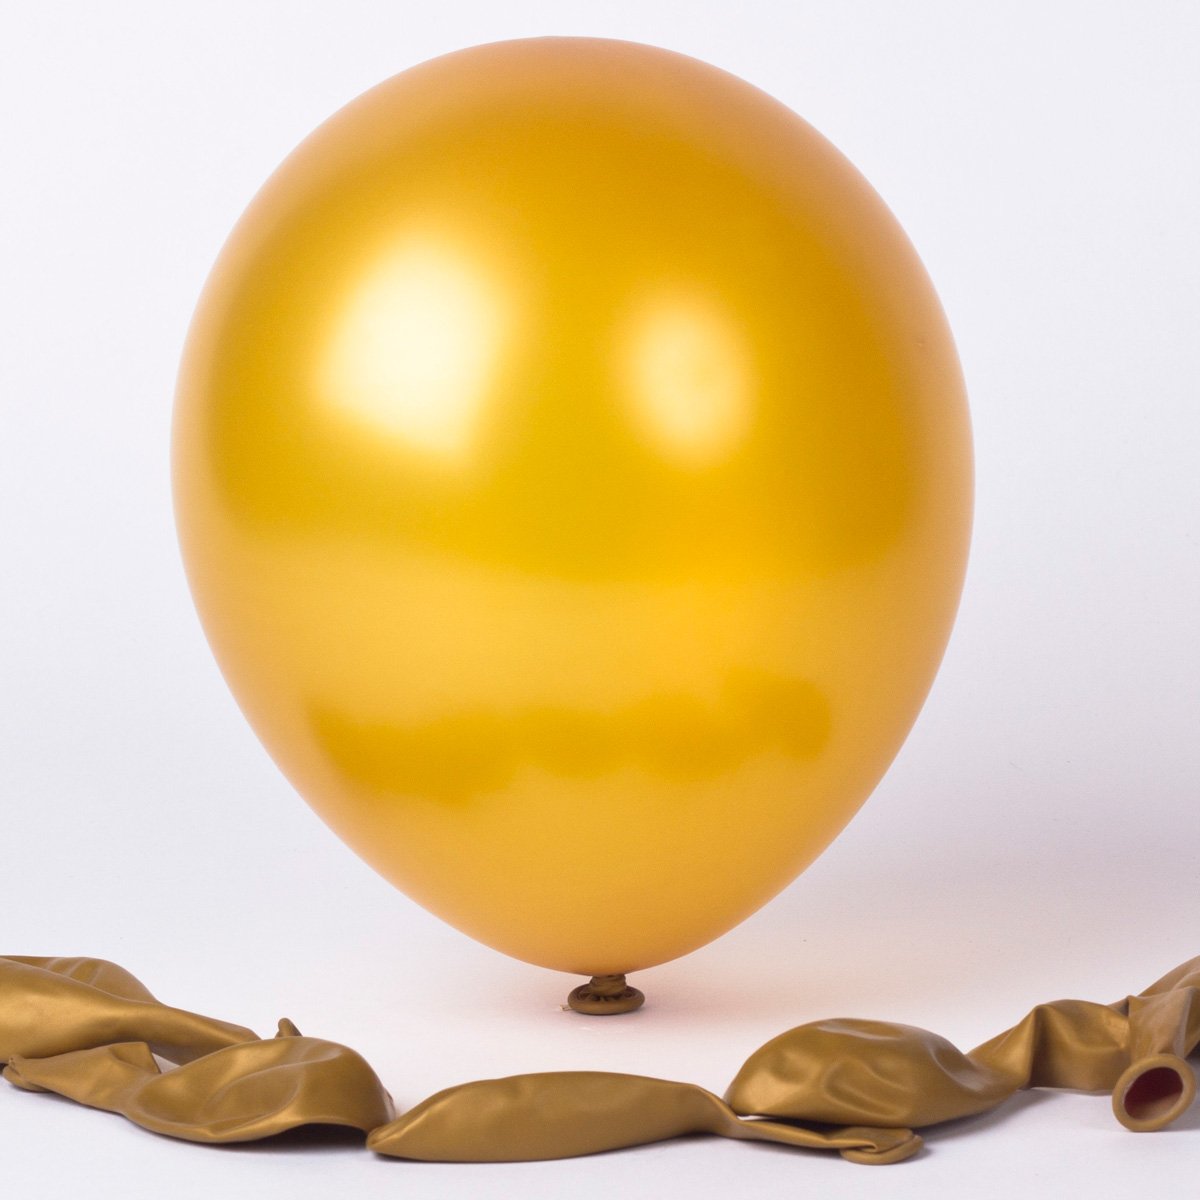 Metallic Gold Air-fill Latex Balloons - Pack Of 6 